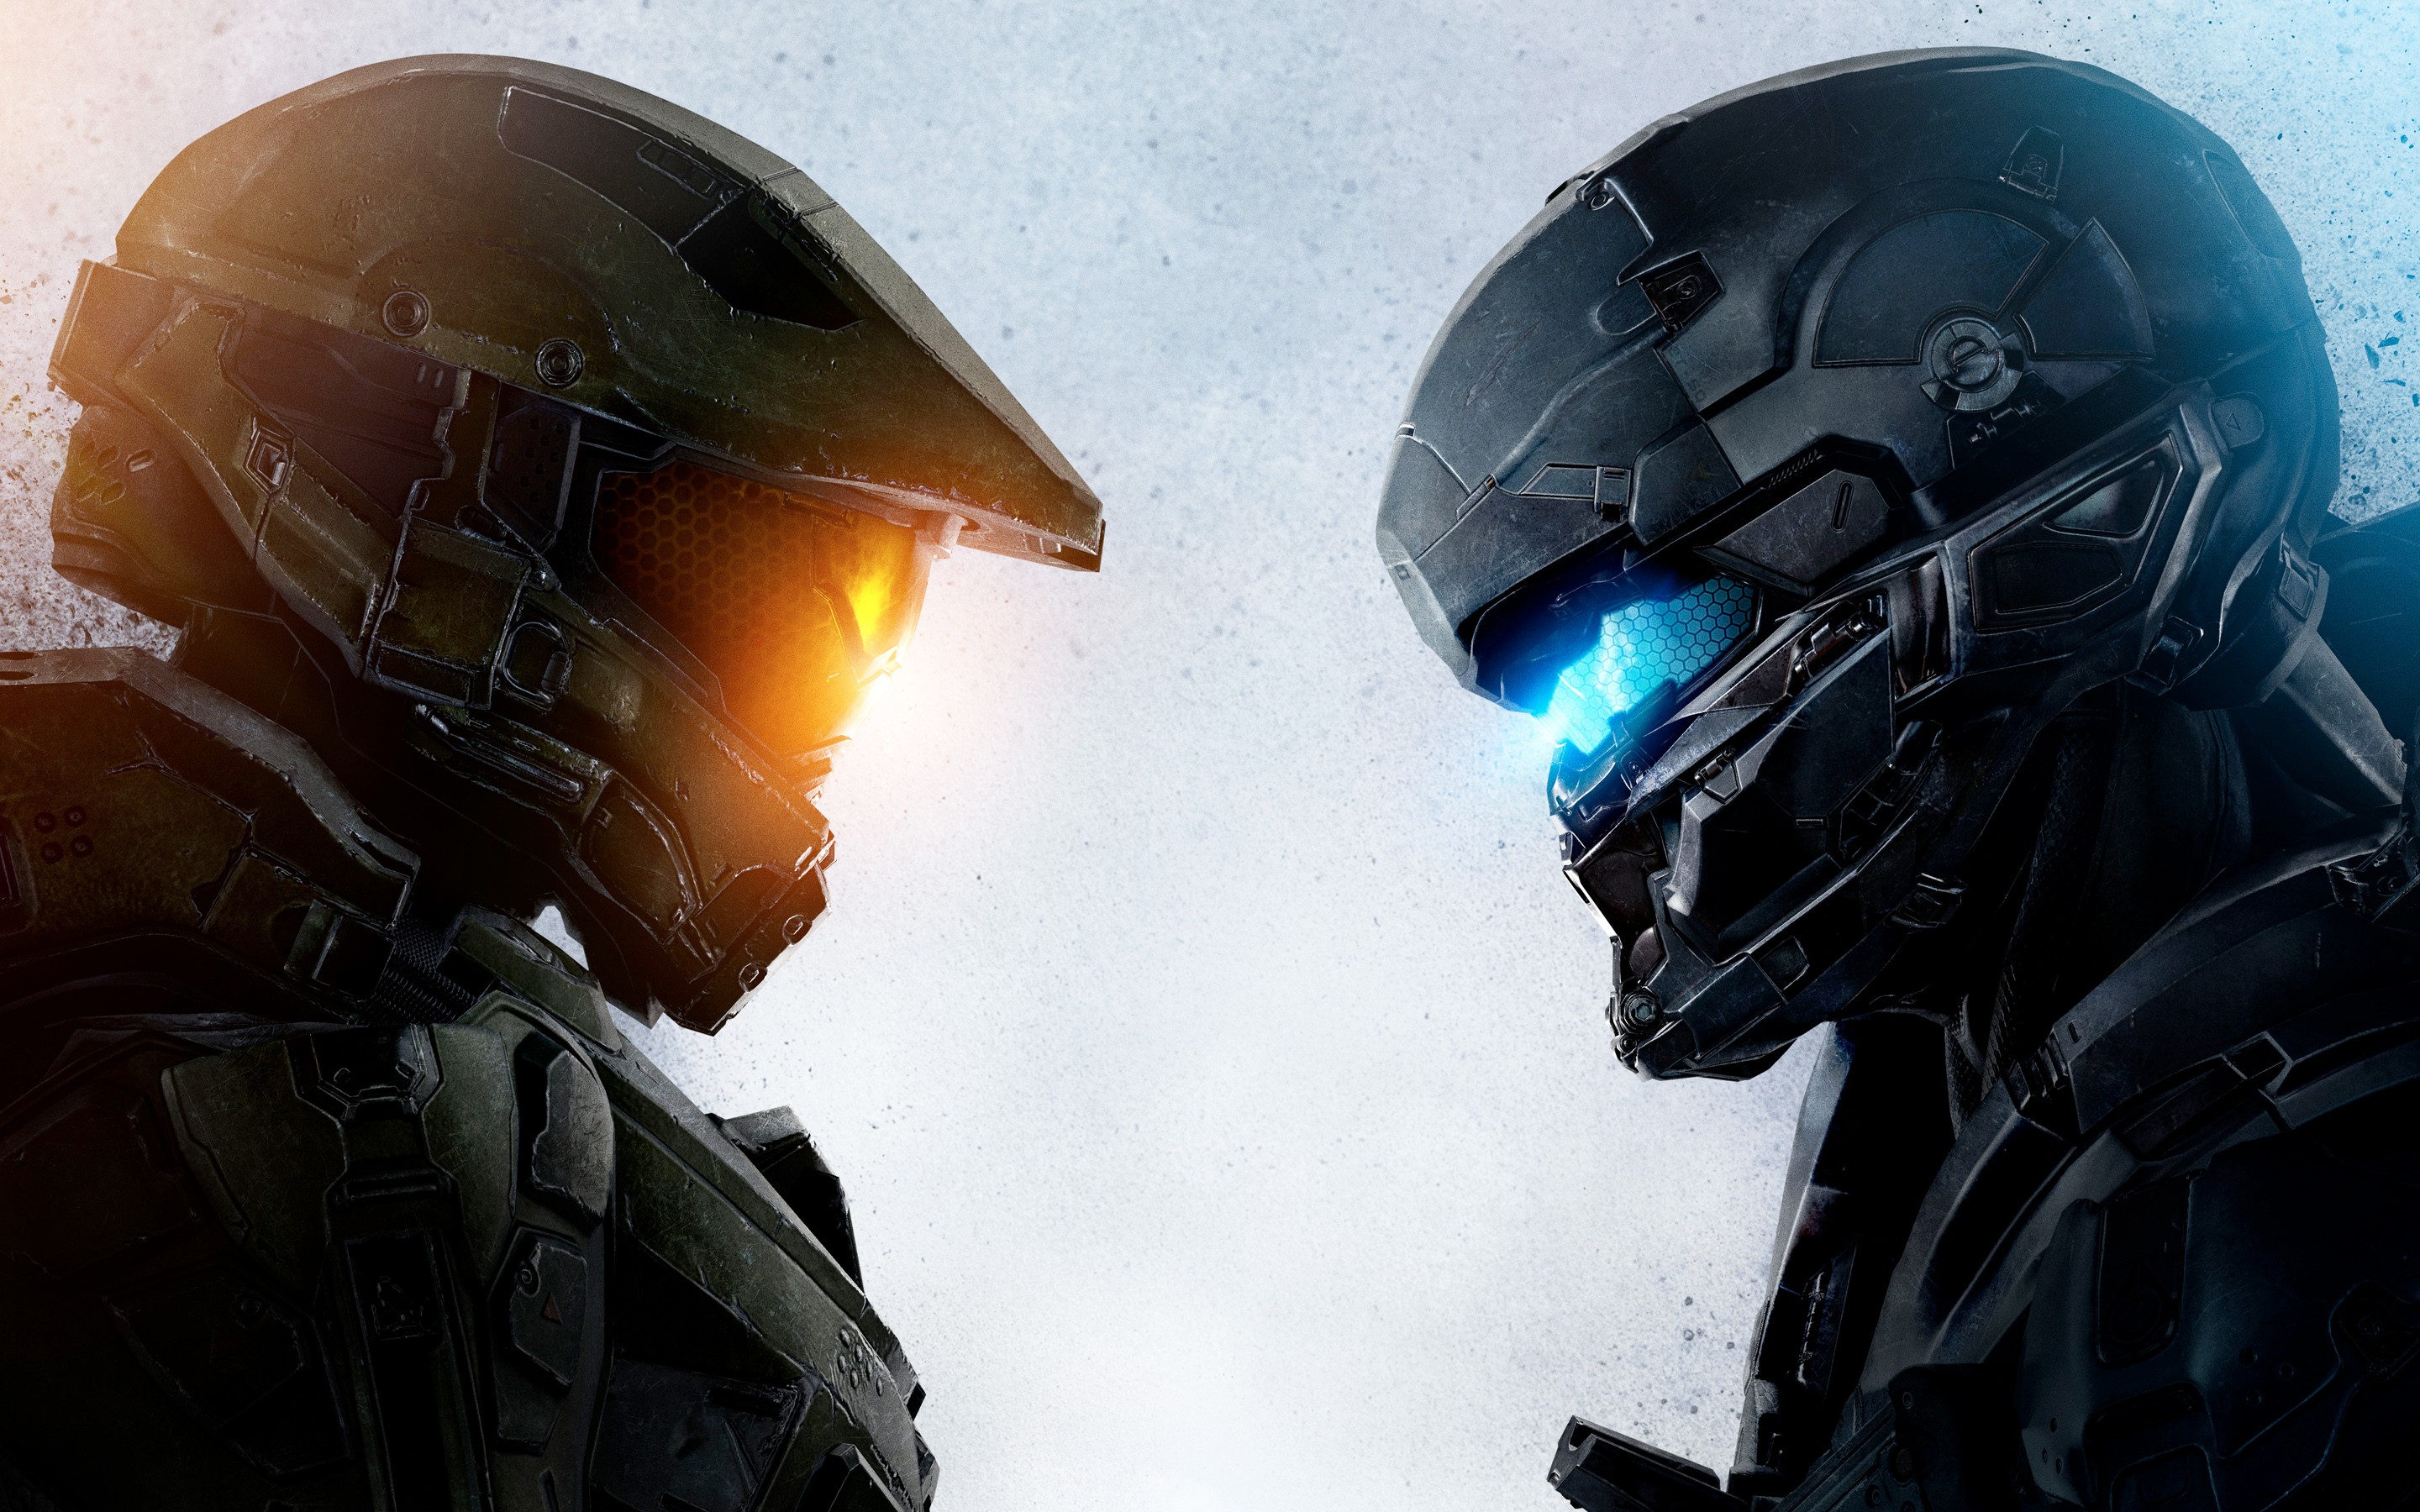 Wallpapers Halo 5 games Xbox games on the desktop